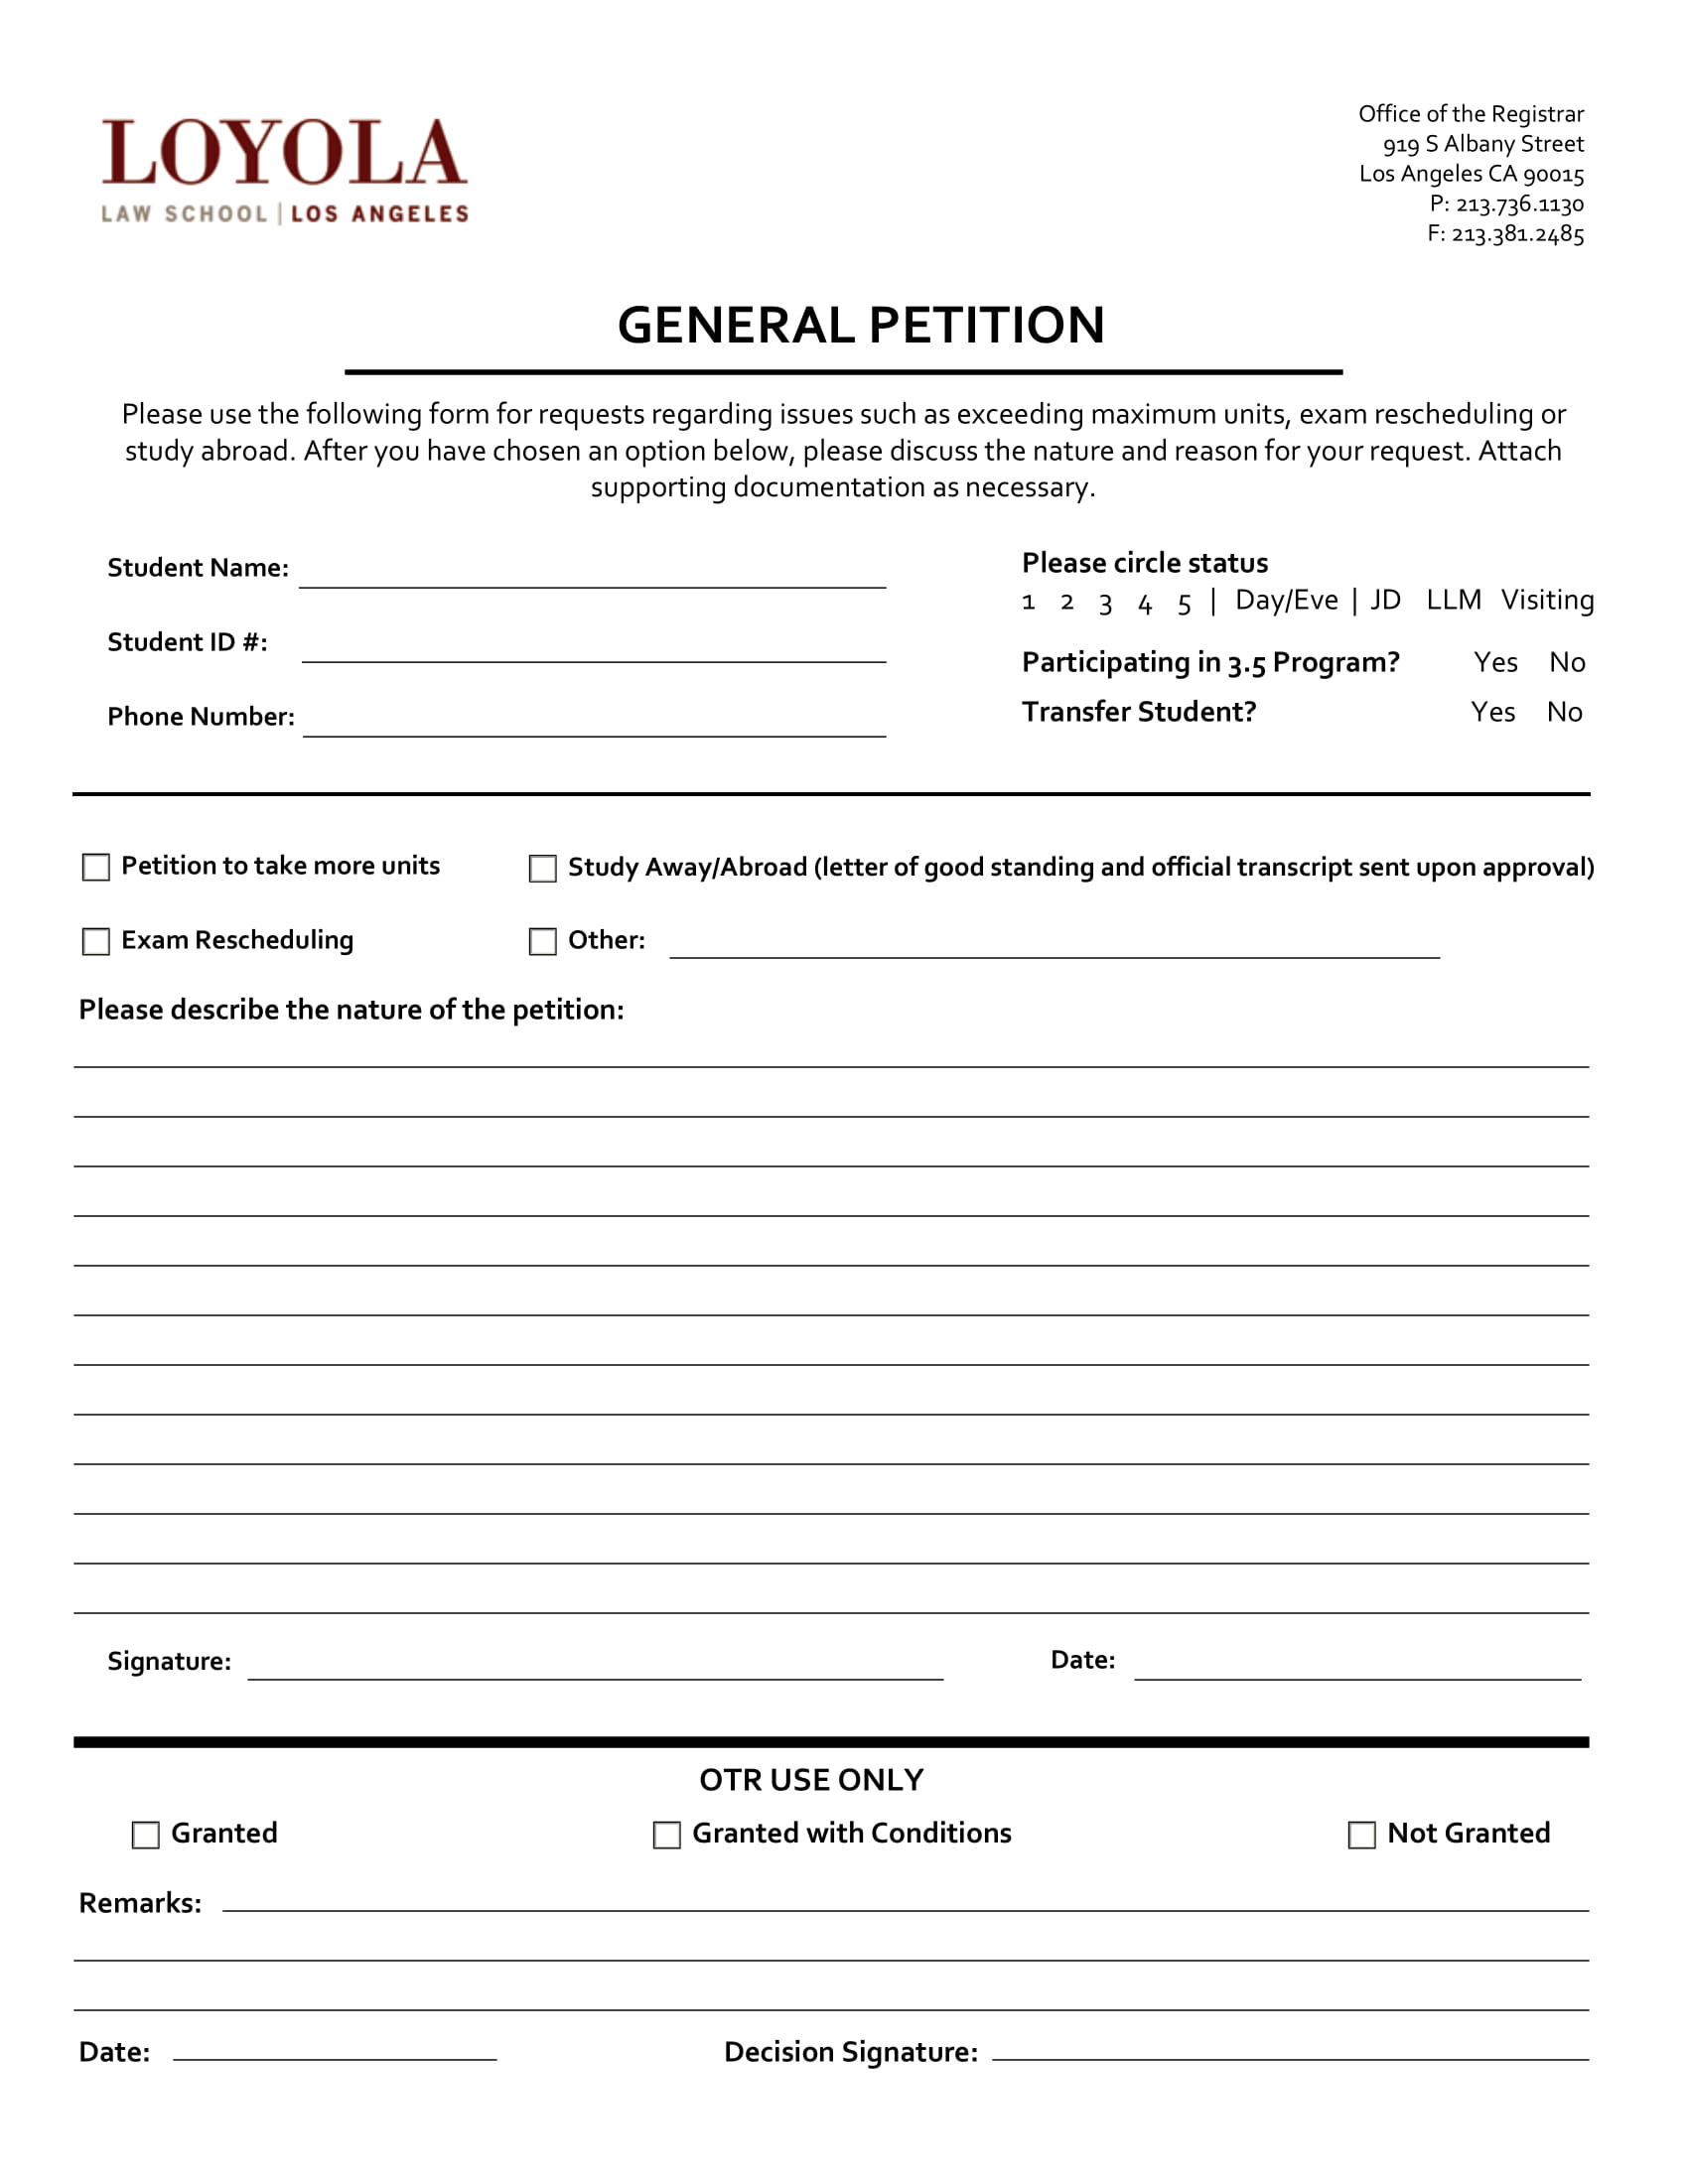 legal general petition form 1